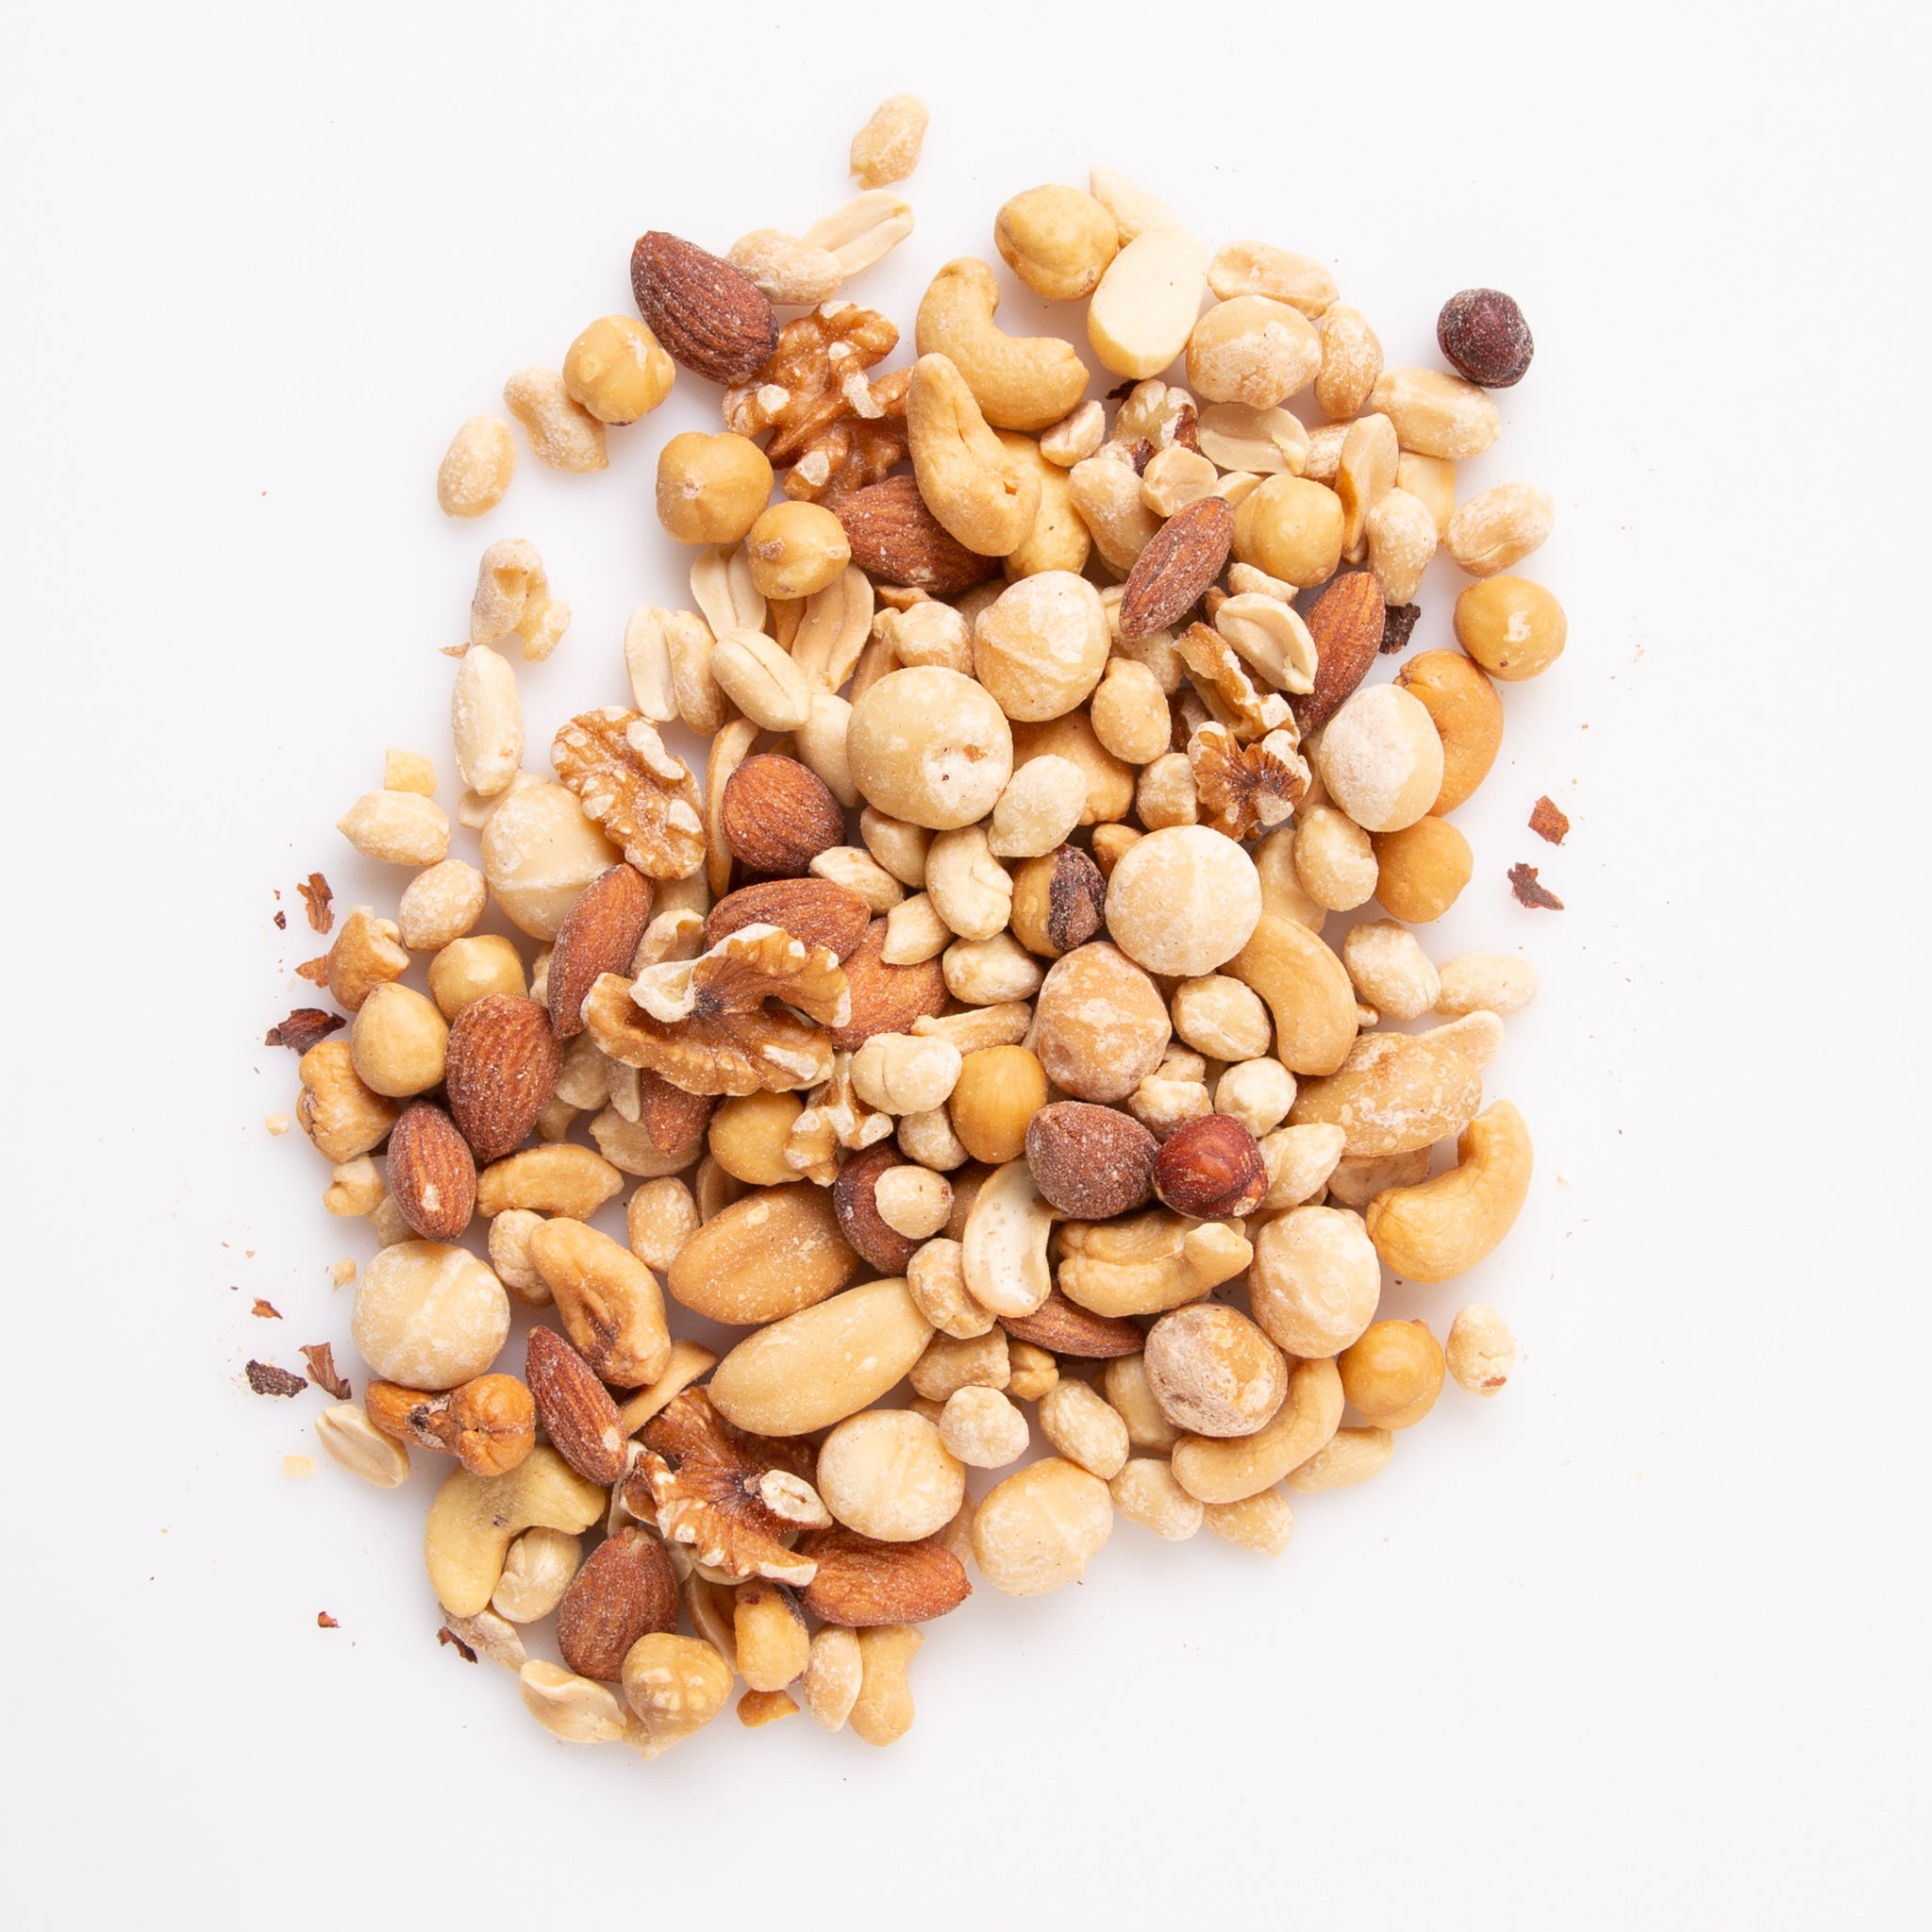 Roasted Salted Nut Mix - With Peanuts (Roasted Nuts) Image 1 - Naked Foods